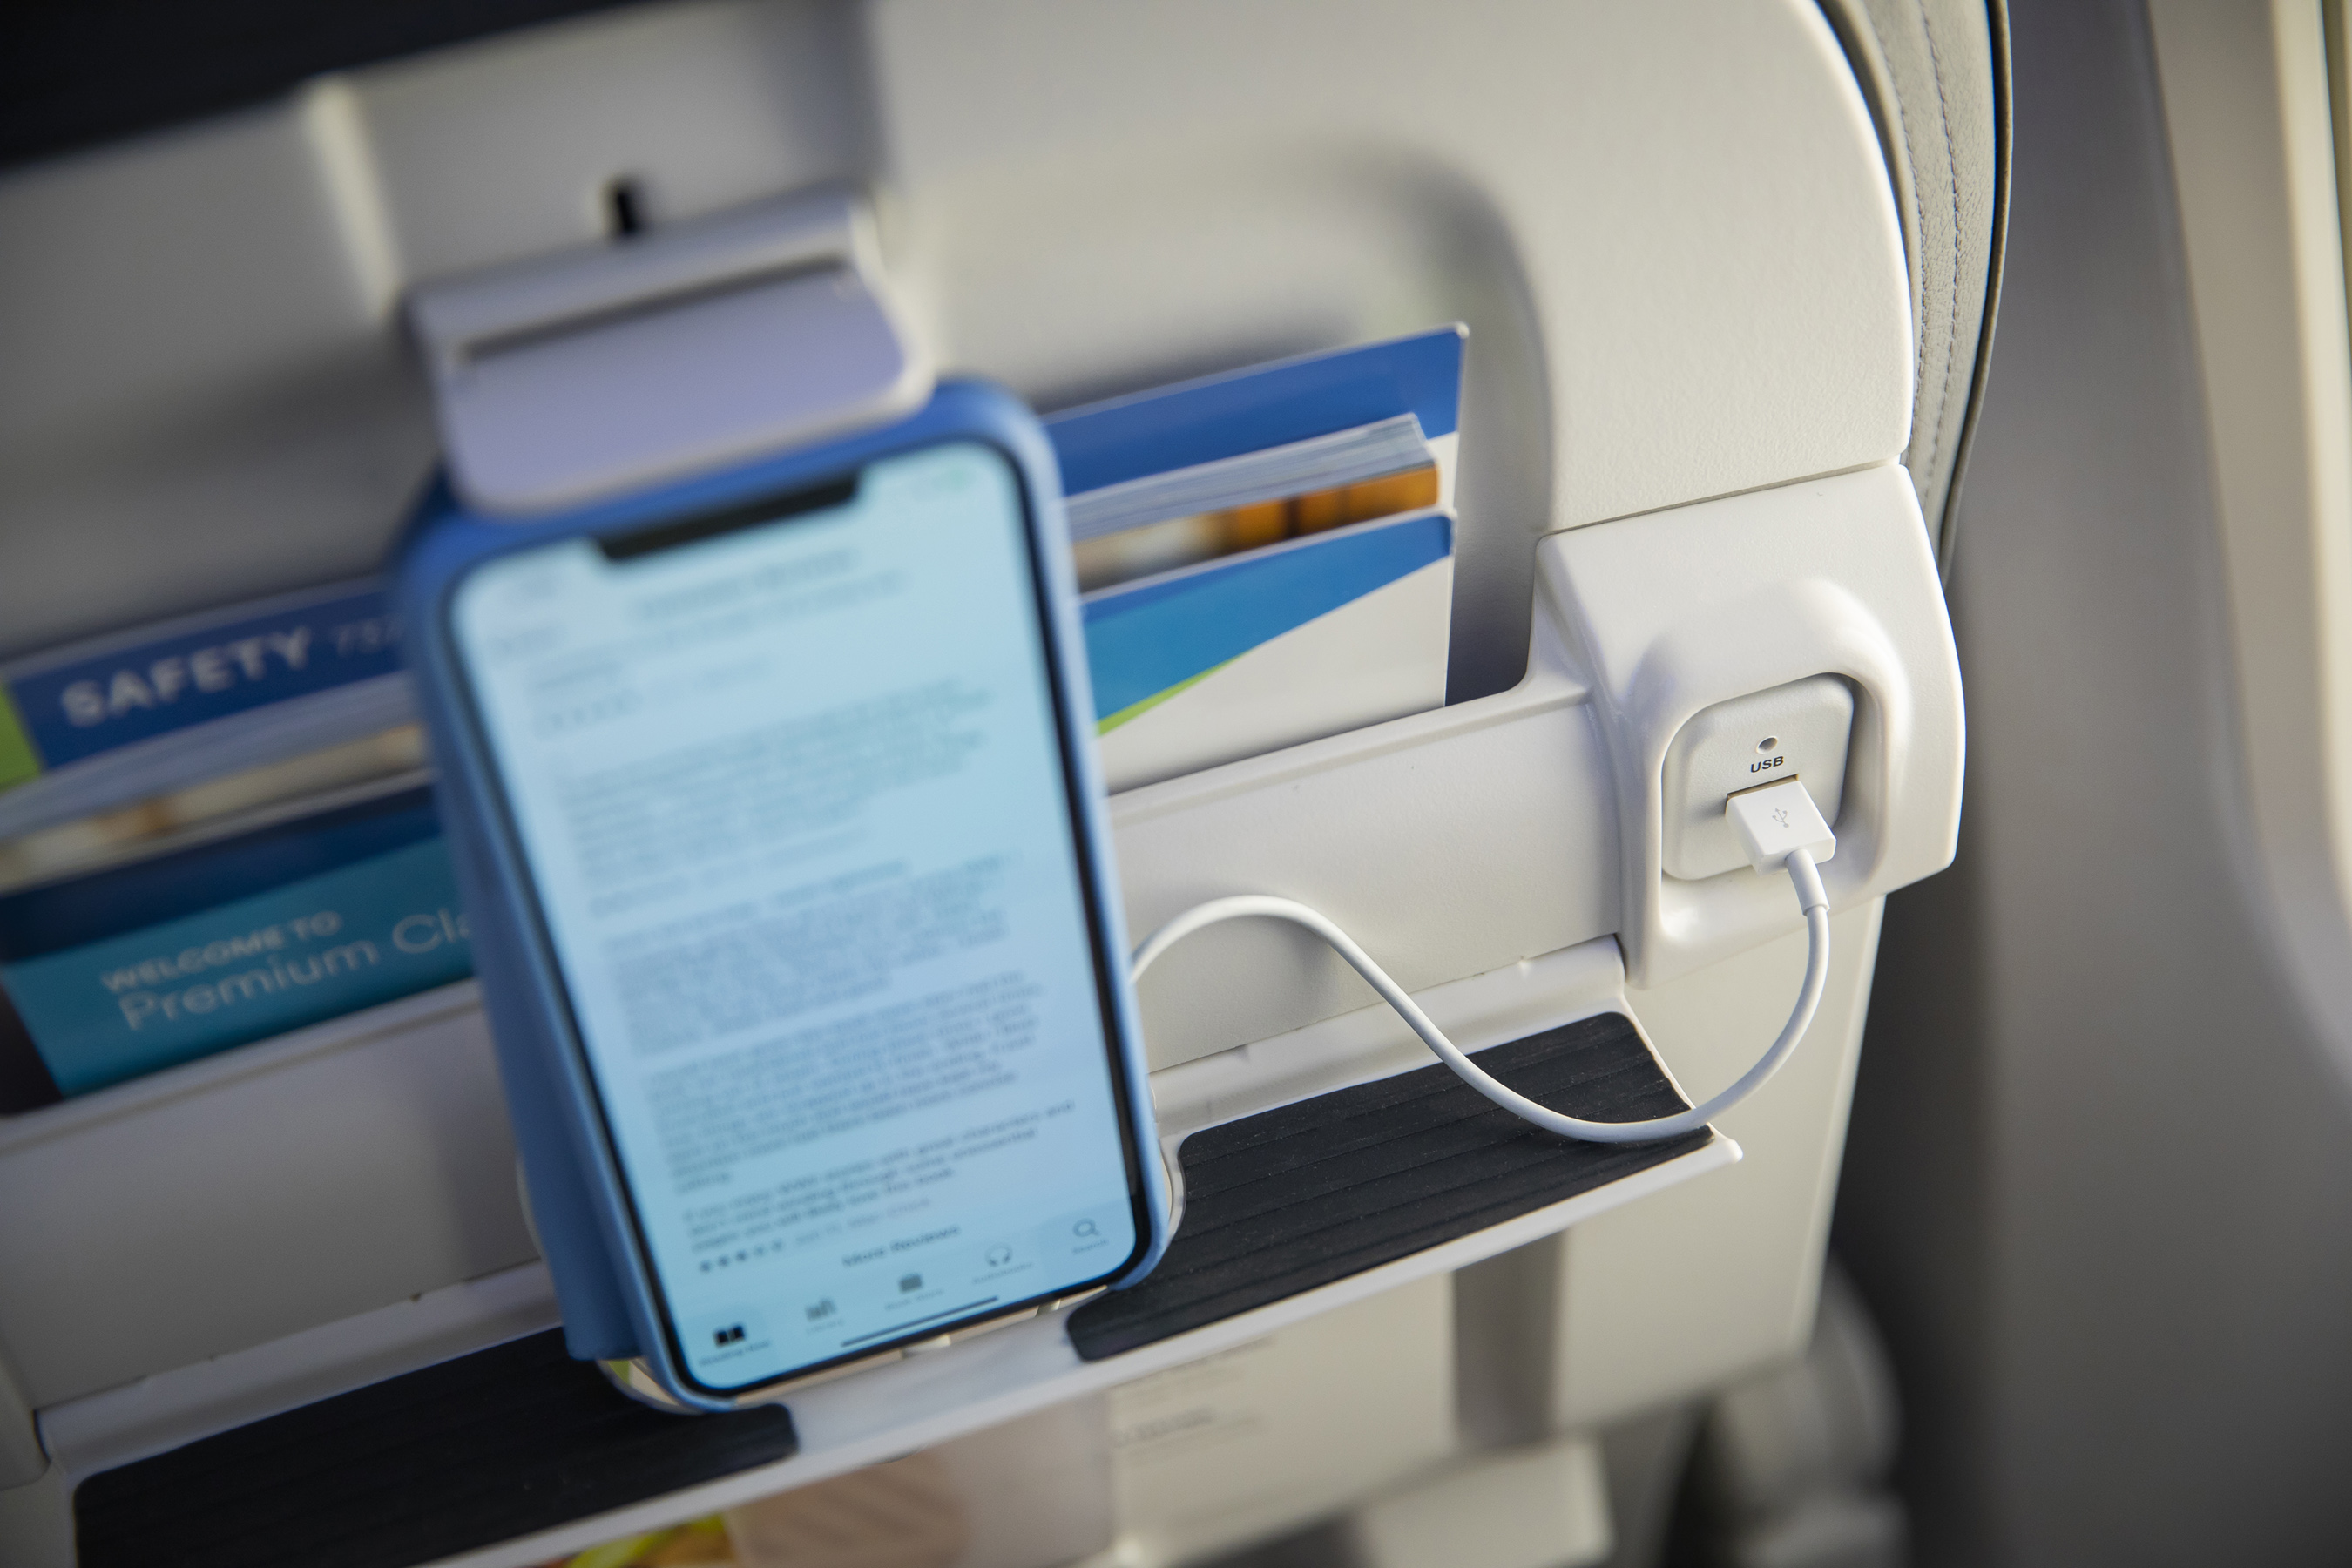 Alaska Airlines' ergonomically-friendly tablet holders and a seatback shelf at each seat make most tablets and smartphones easy to view and secure.